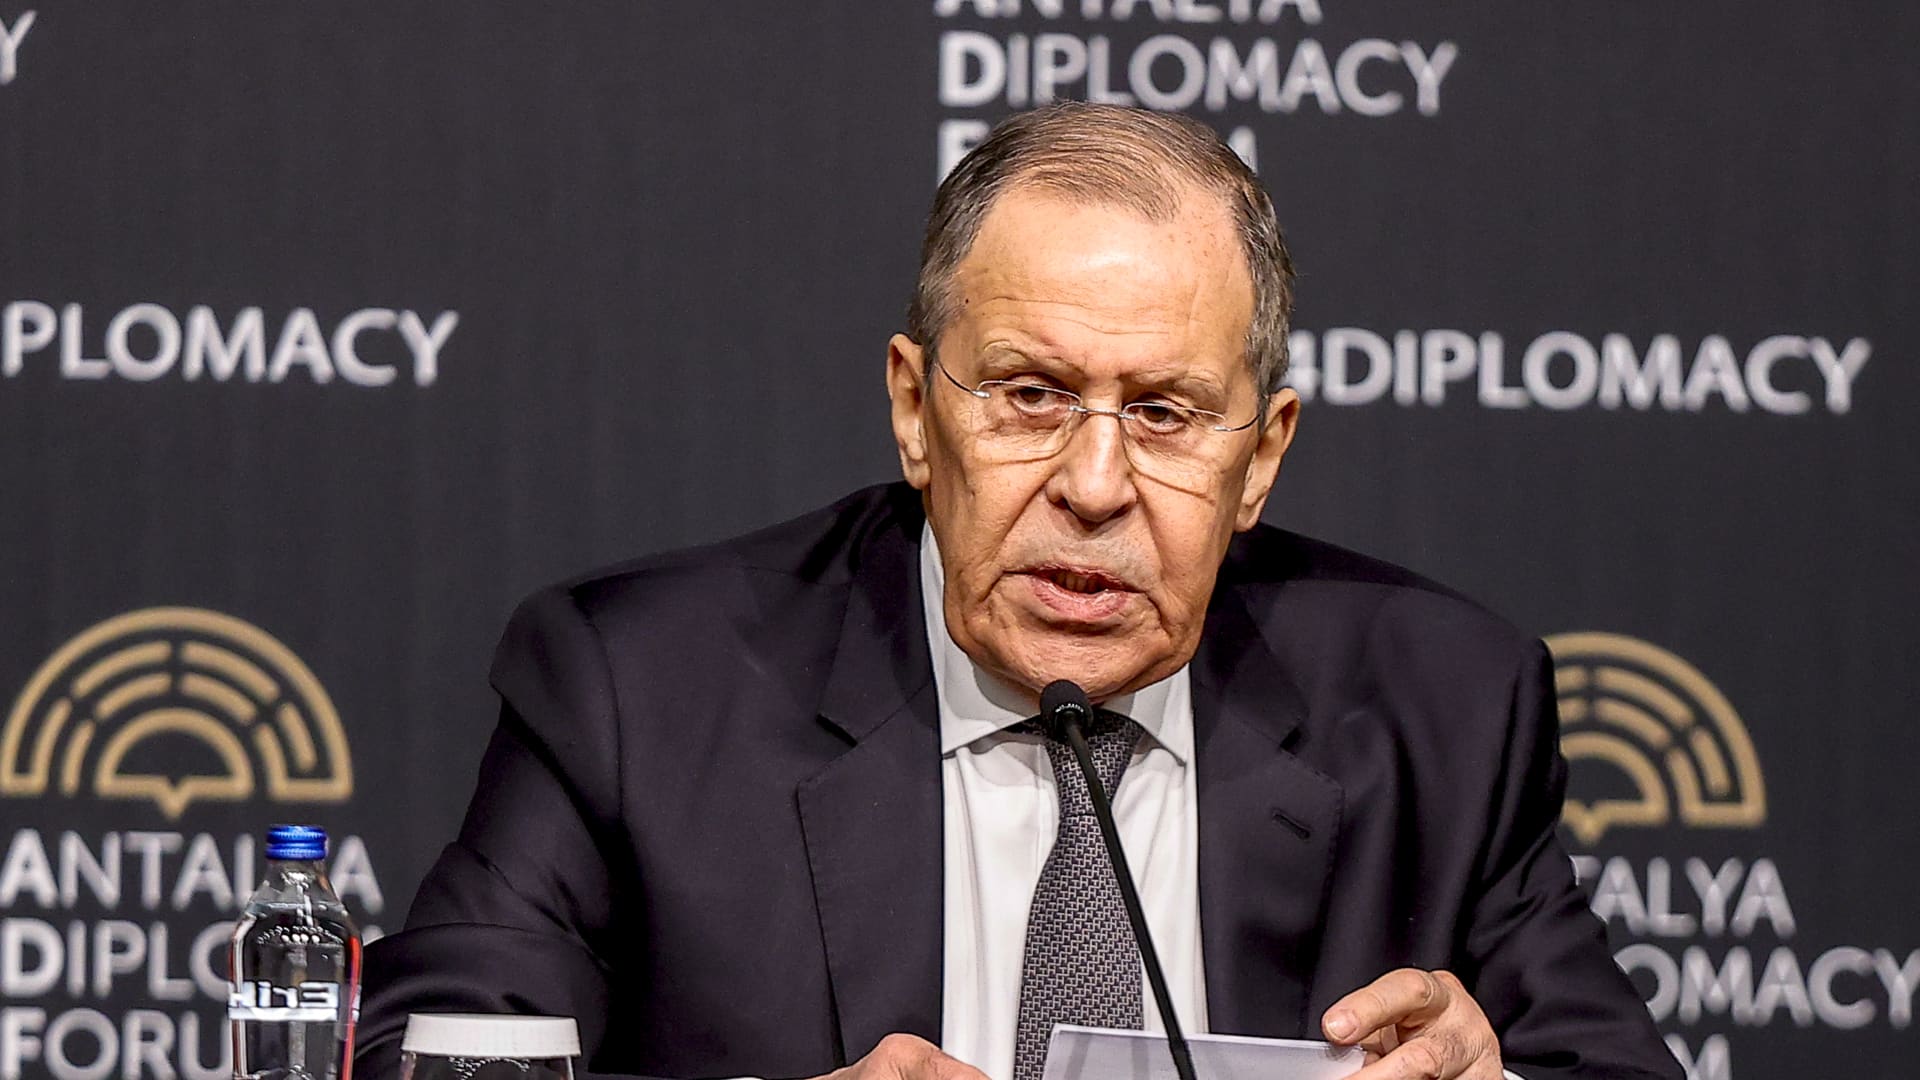 Russian Foreign Minister Sergey Lavrov holds a press conference after the Russia-Turkiye-Ukraine tripartite Foreign Ministers meeting in Antalya, Turkiye on March 10, 2022.